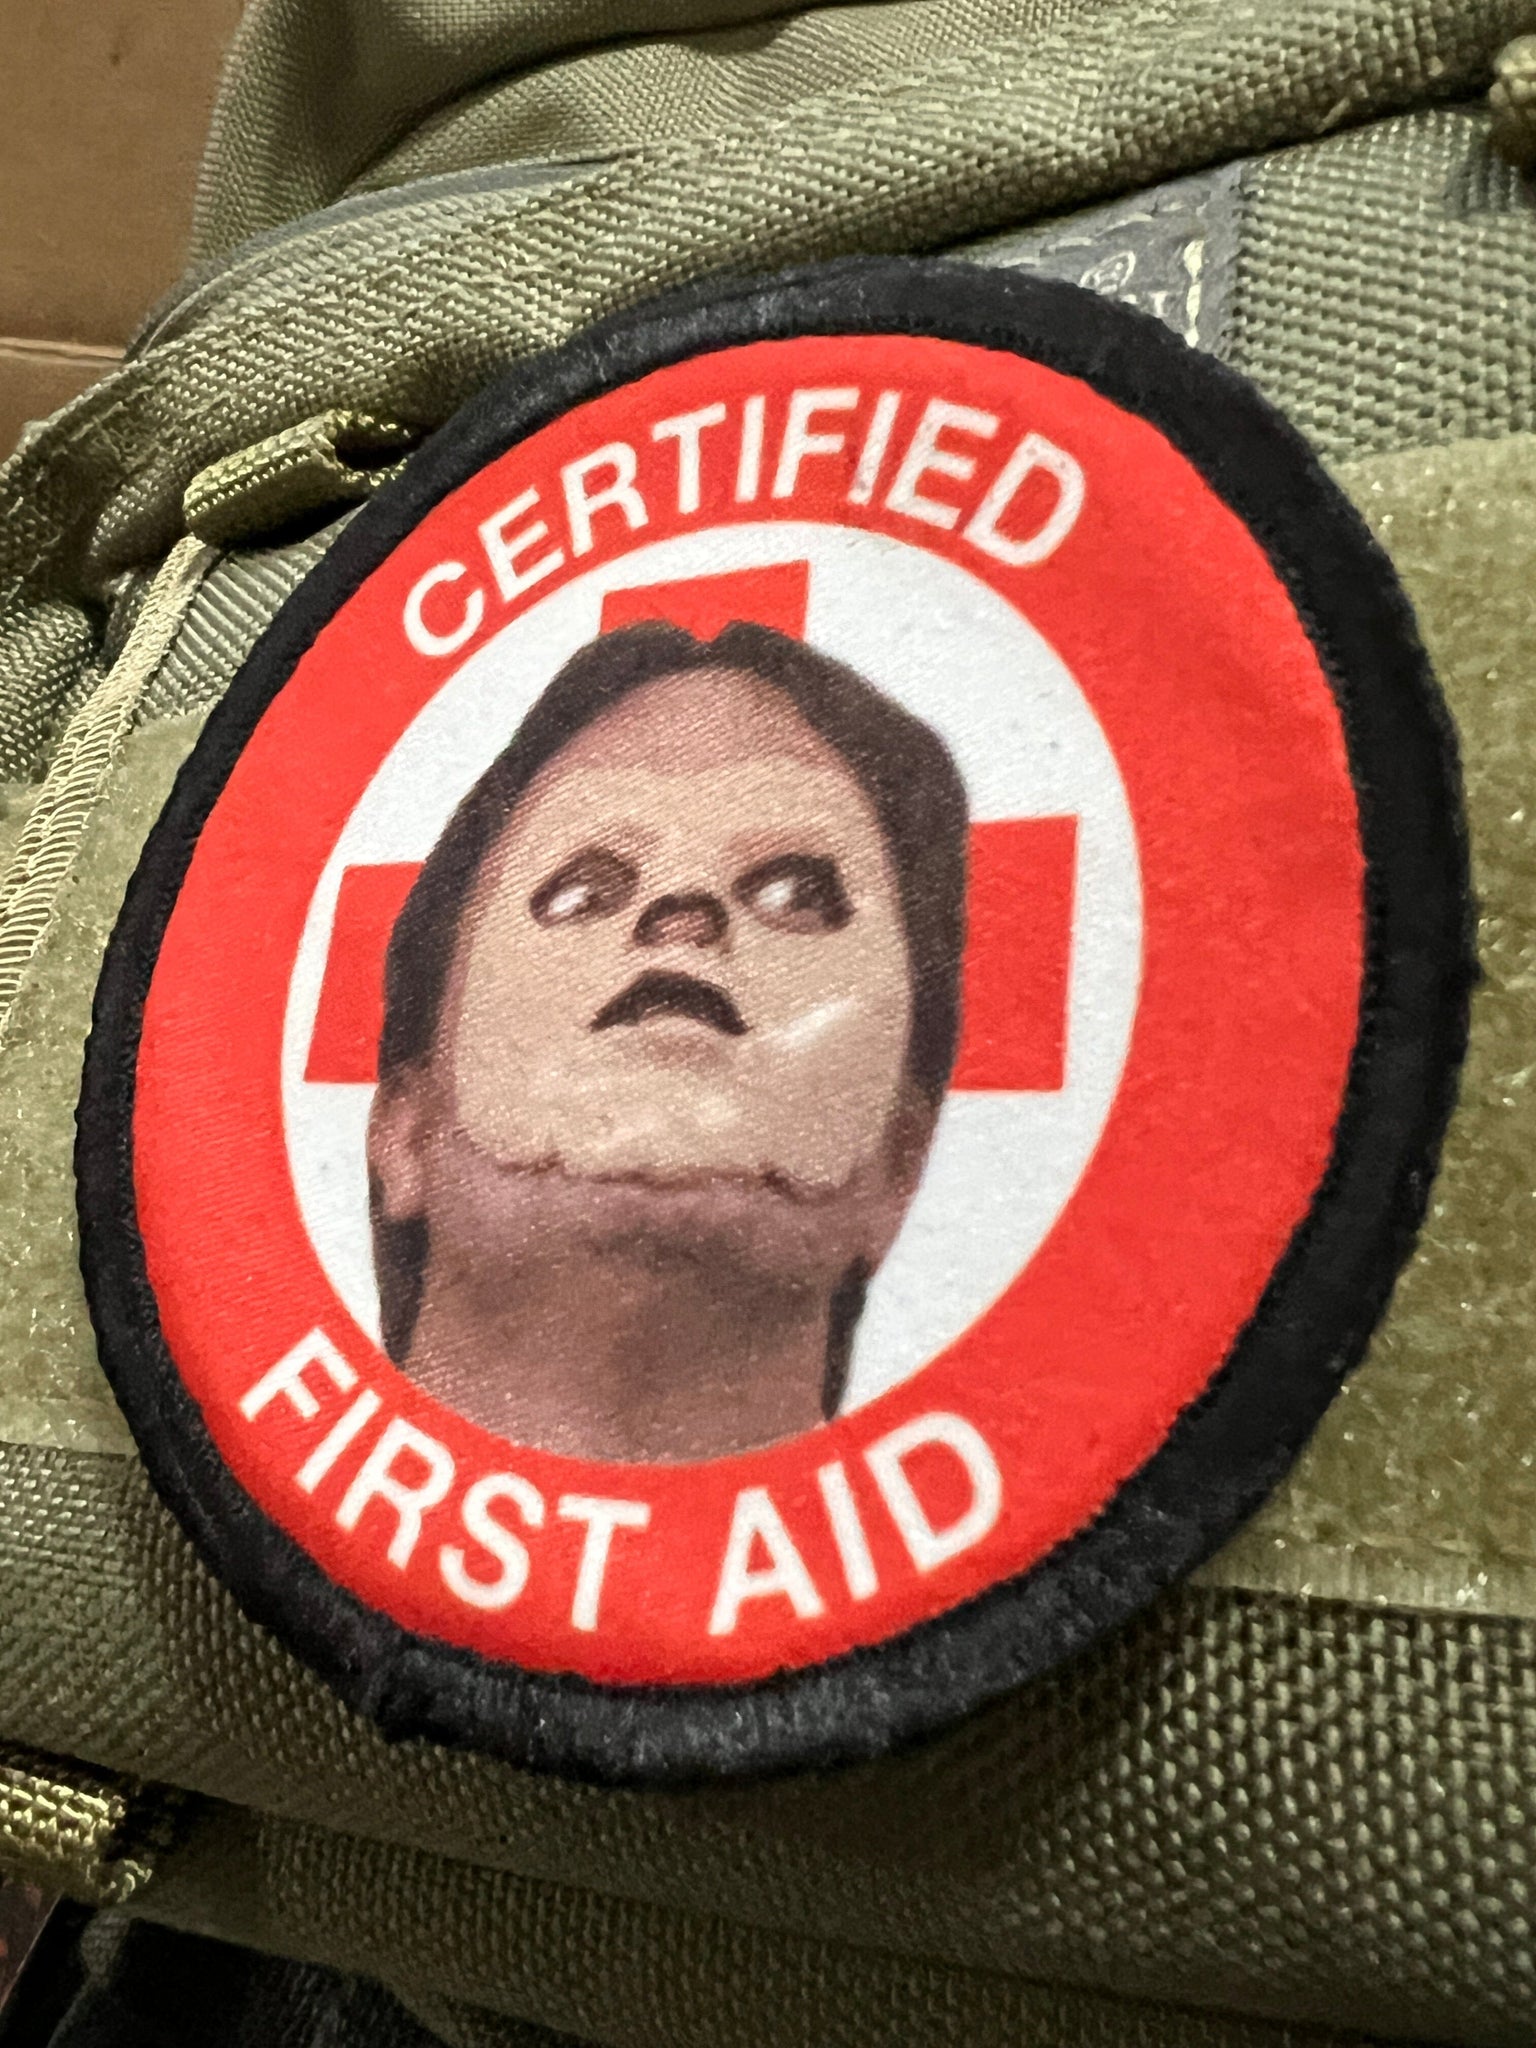 https://redheadedtshirts.com/cdn/shop/products/the-office-dwight-schrute-first-aid-certified-morale-patch-morale-patches-redheaded-t-shirts-590957_2048x2048.jpg?v=1689325512